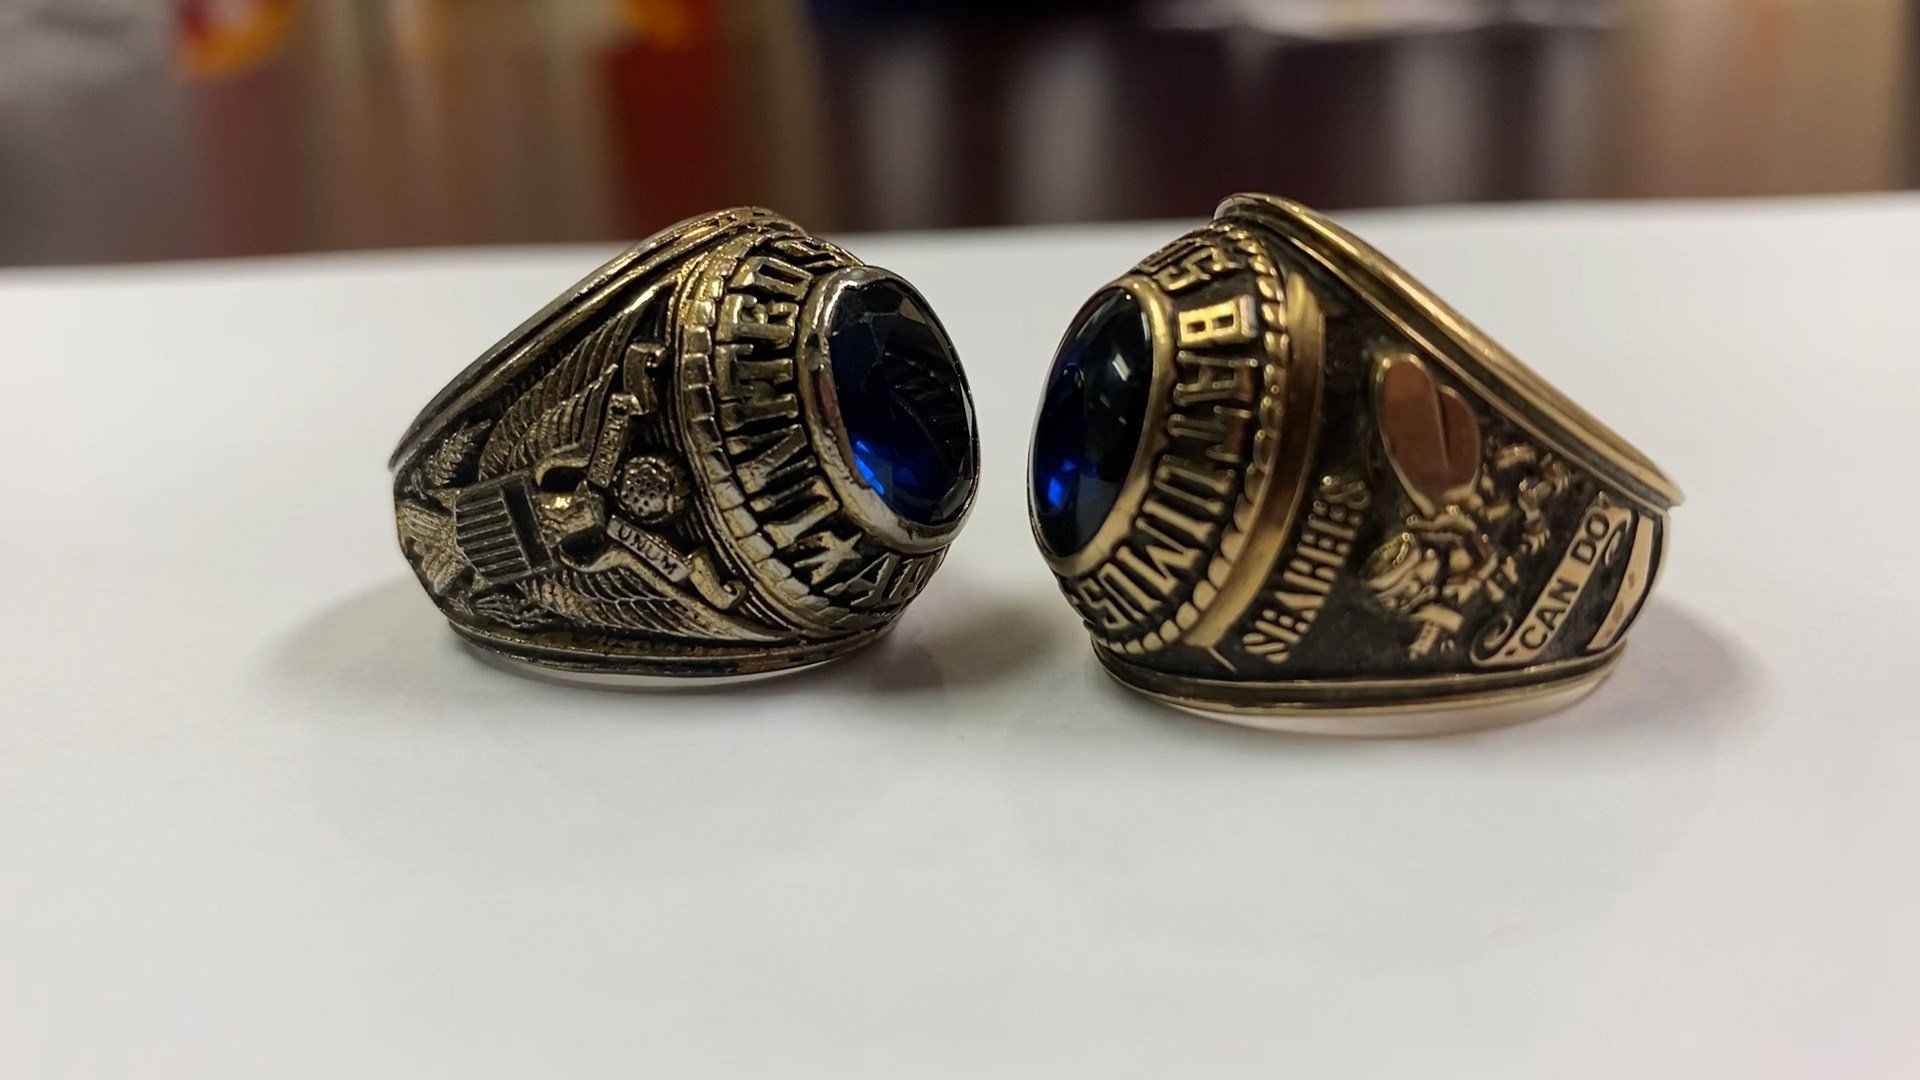 The Search for the Owners of Two Military Rings